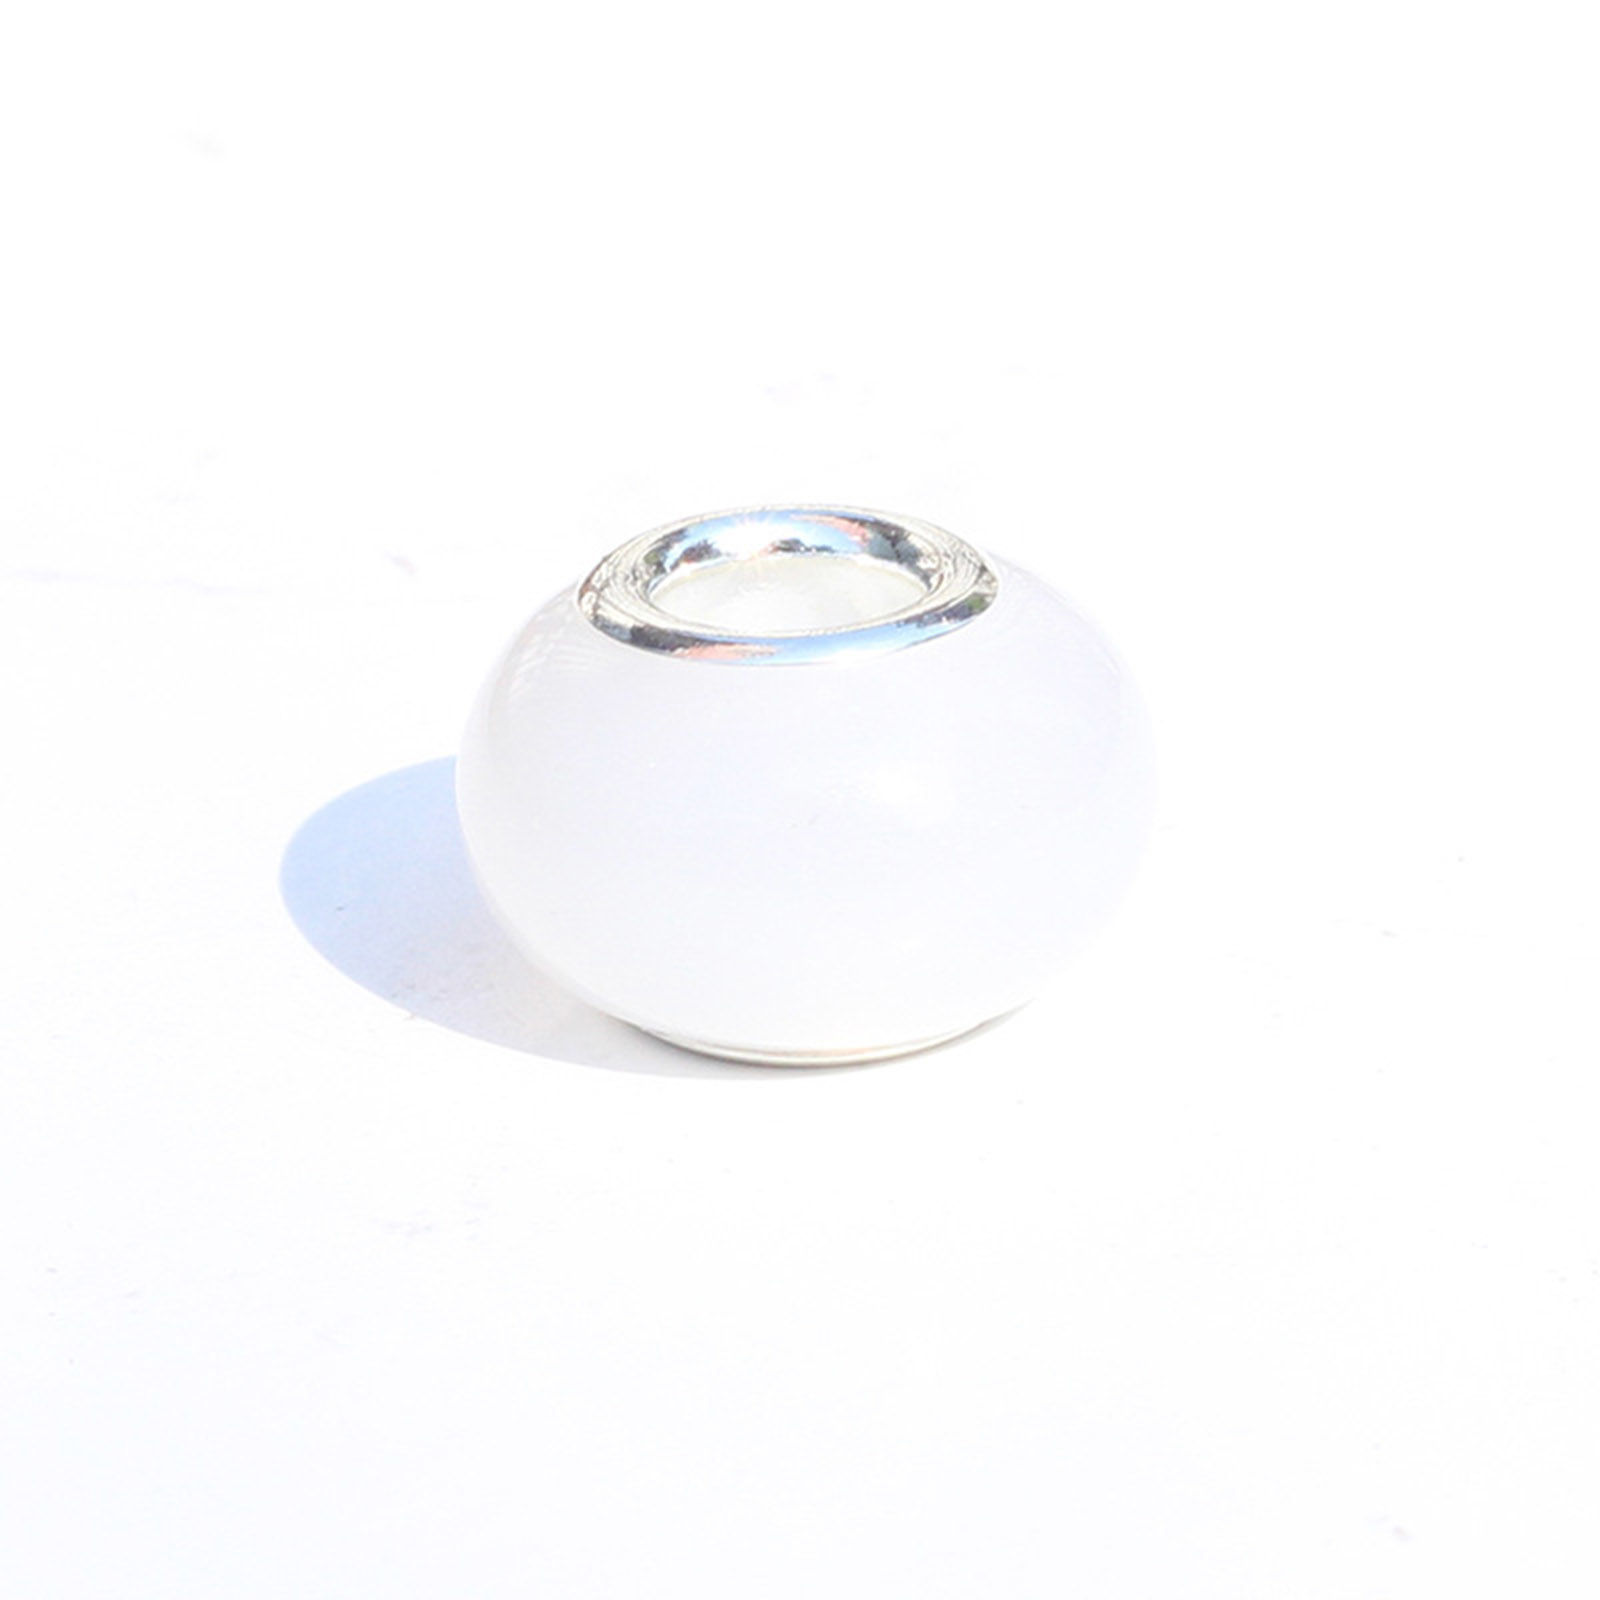 Picture of Resin European Style Large Hole Charm Beads White Round Glow In The Dark Luminous 14mm x 9mm, Hole: Approx 5mm, 20 PCs